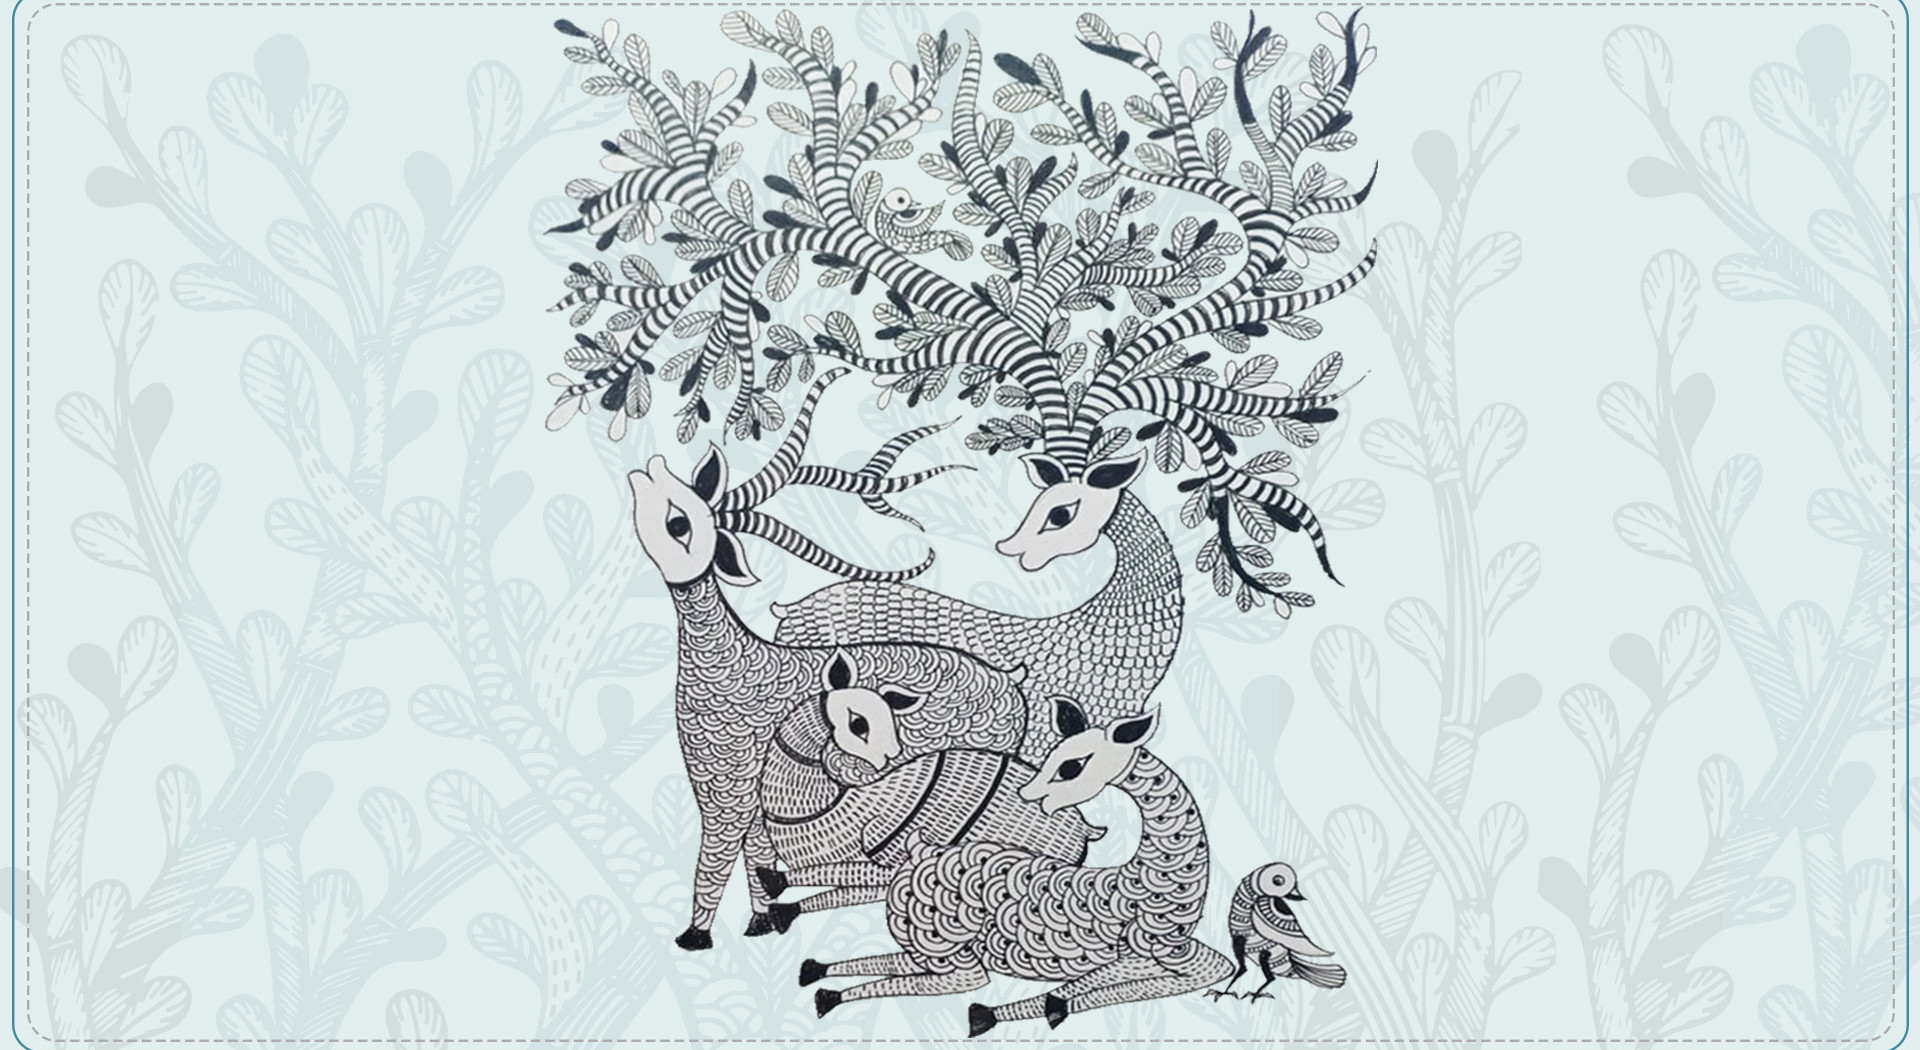 Gond Folk Art Paintings from India – Silk Road Gallery